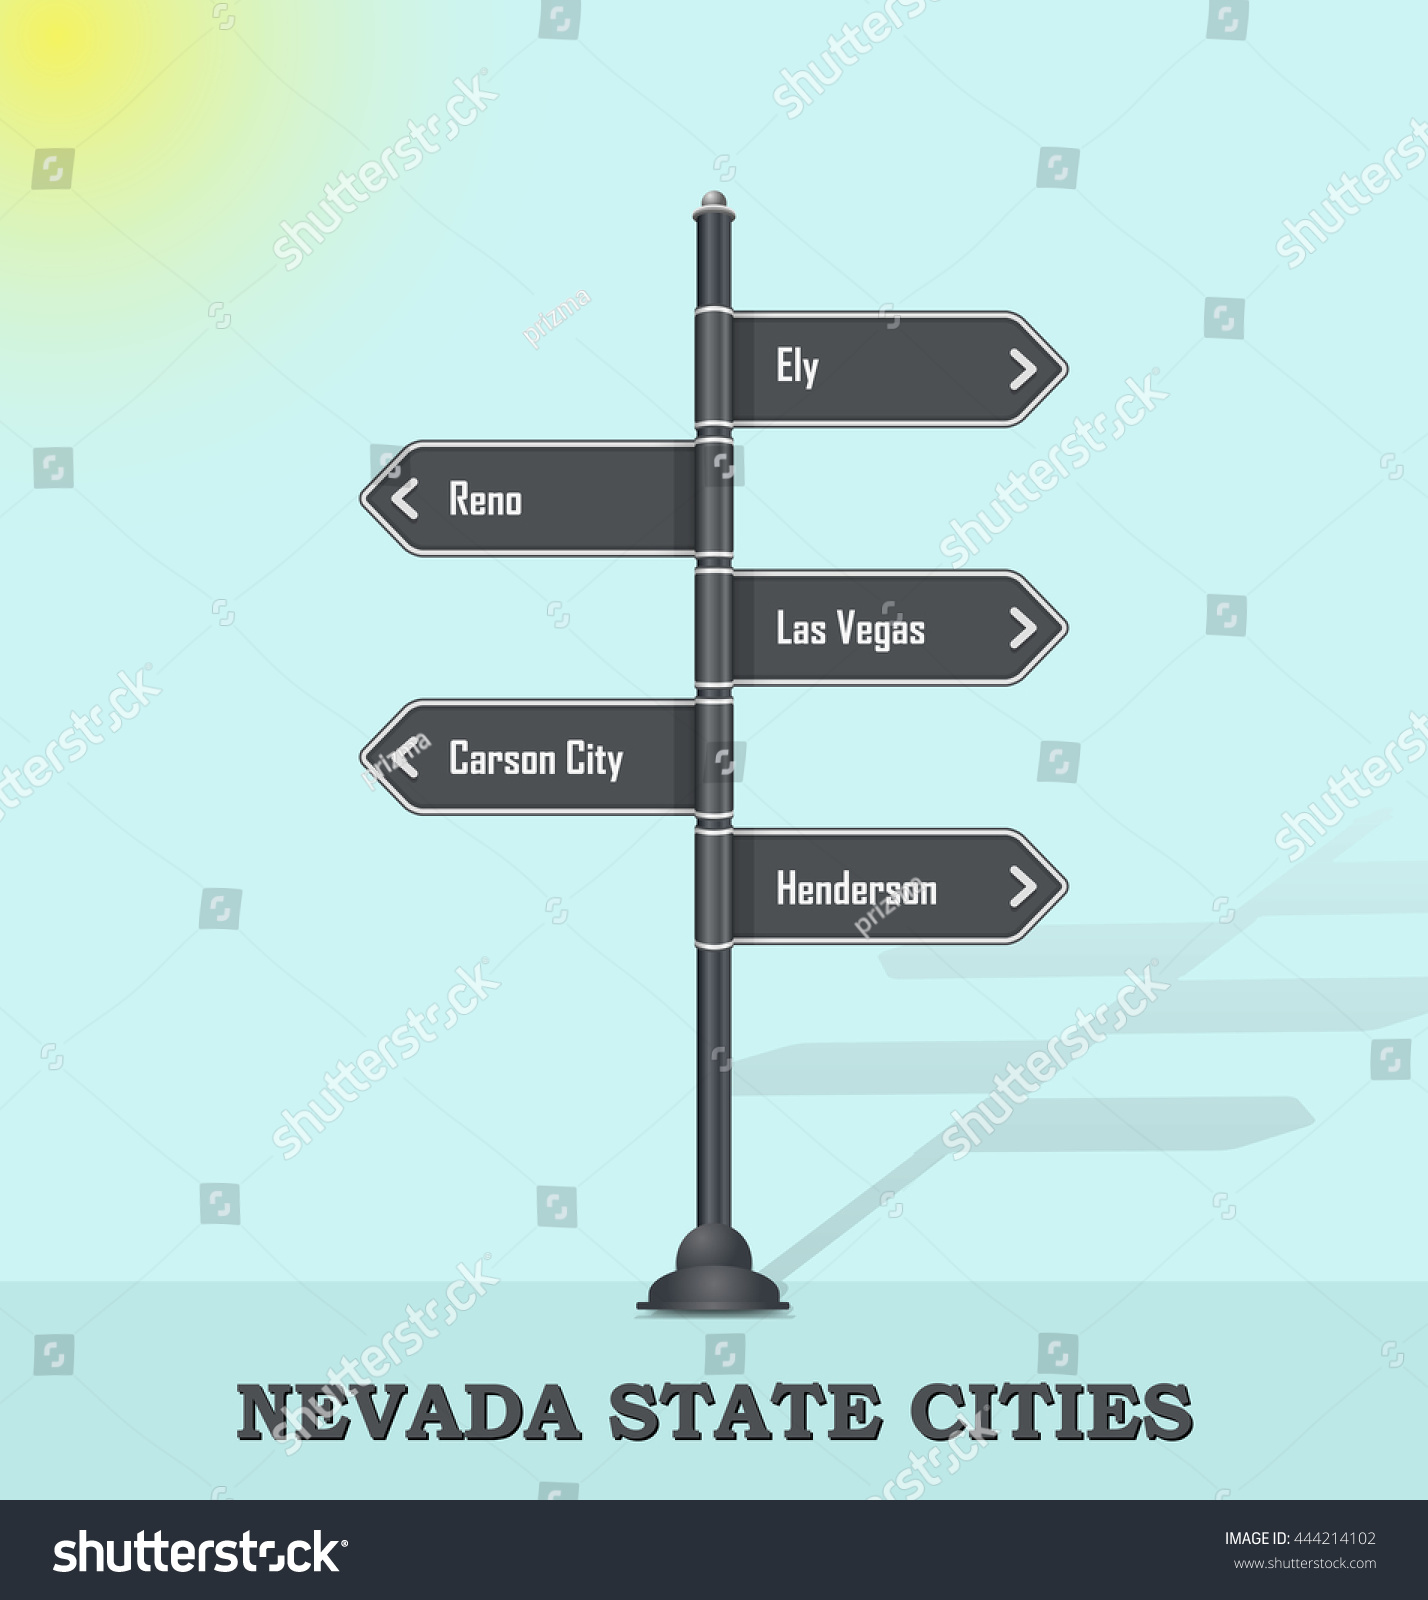 SVG of Road signpost template for USA towns and cities - Nevada state svg